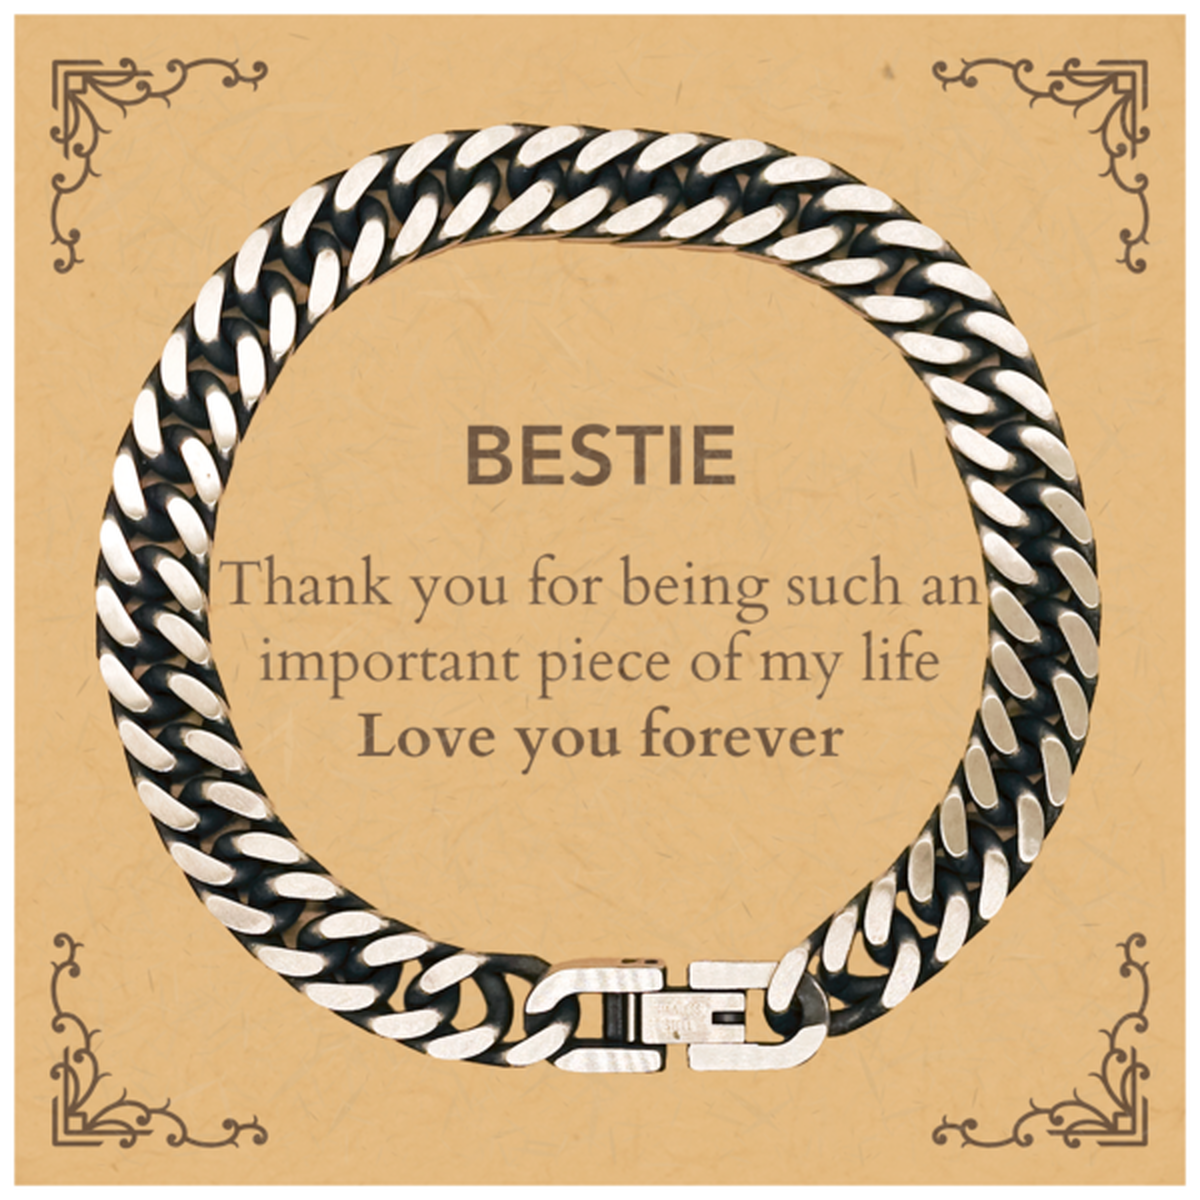 Appropriate Bestie Cuban Link Chain Bracelet Epic Birthday Gifts for Bestie Thank you for being such an important piece of my life Bestie Christmas Mothers Fathers Day